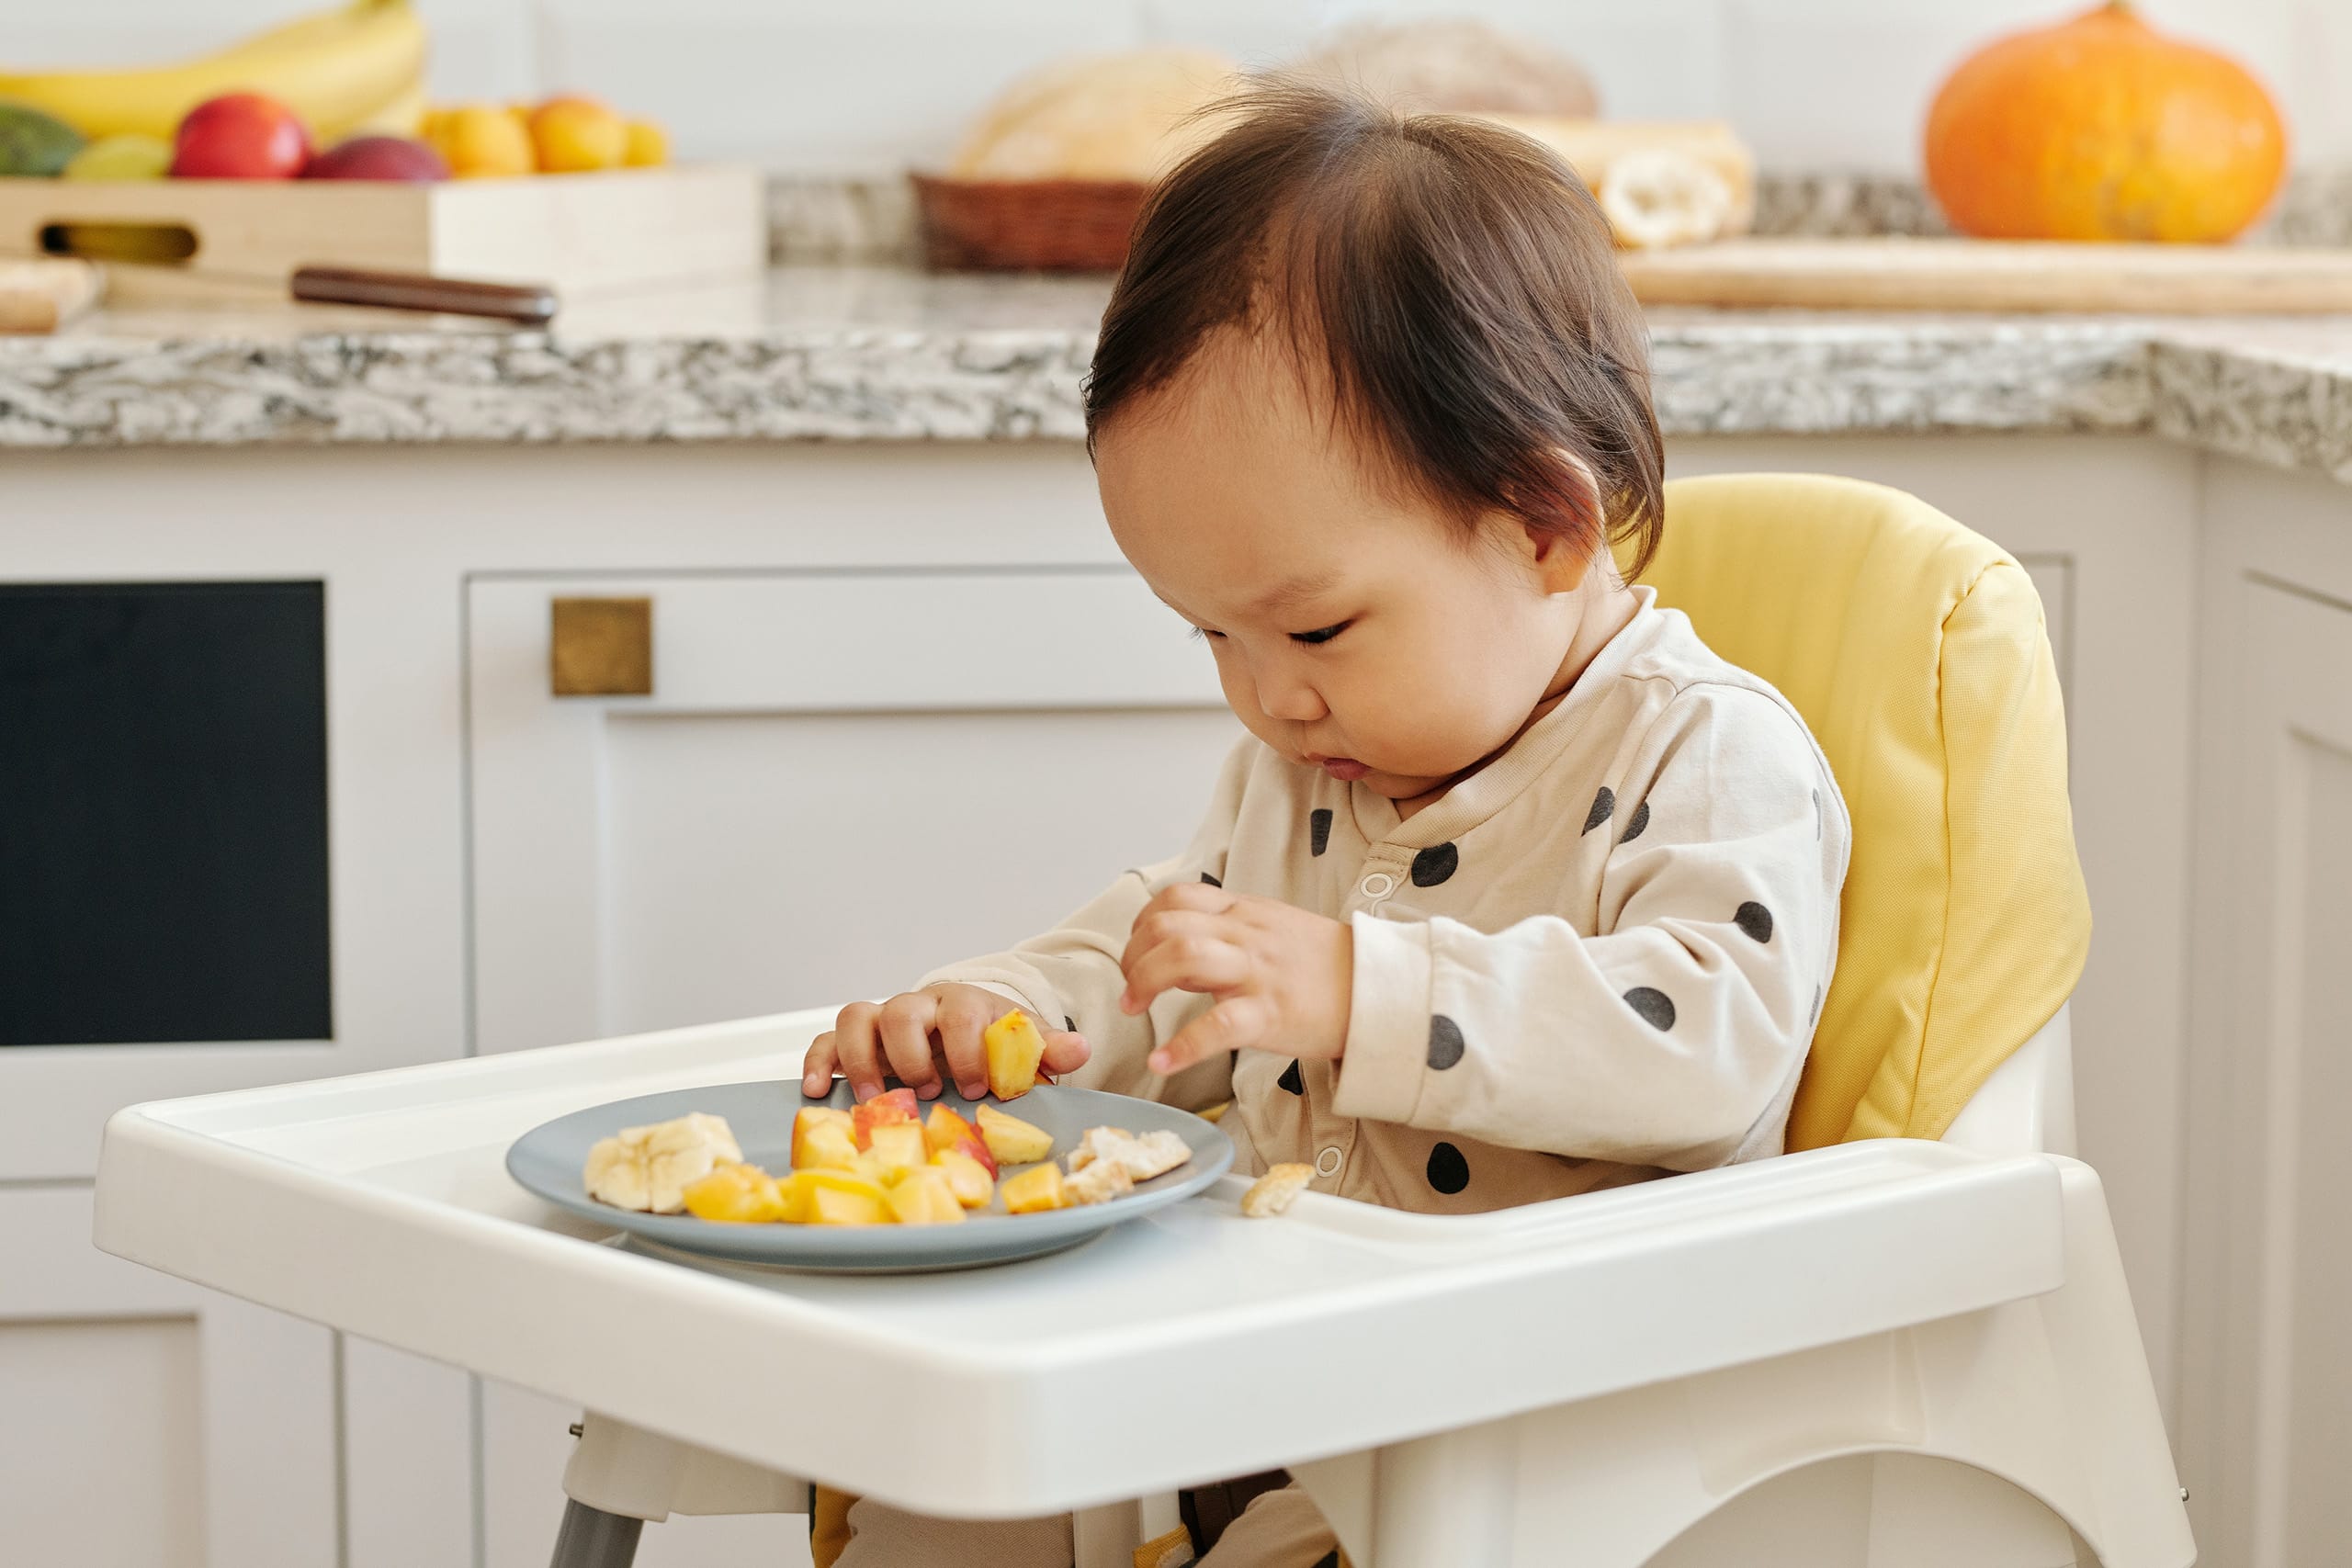 Adorable Asian baby enjoying sliced fruits for breakfast in a baby chair within a homely kitchen setting, showcasing Travel'N Tots high quality mealtime rental equipment